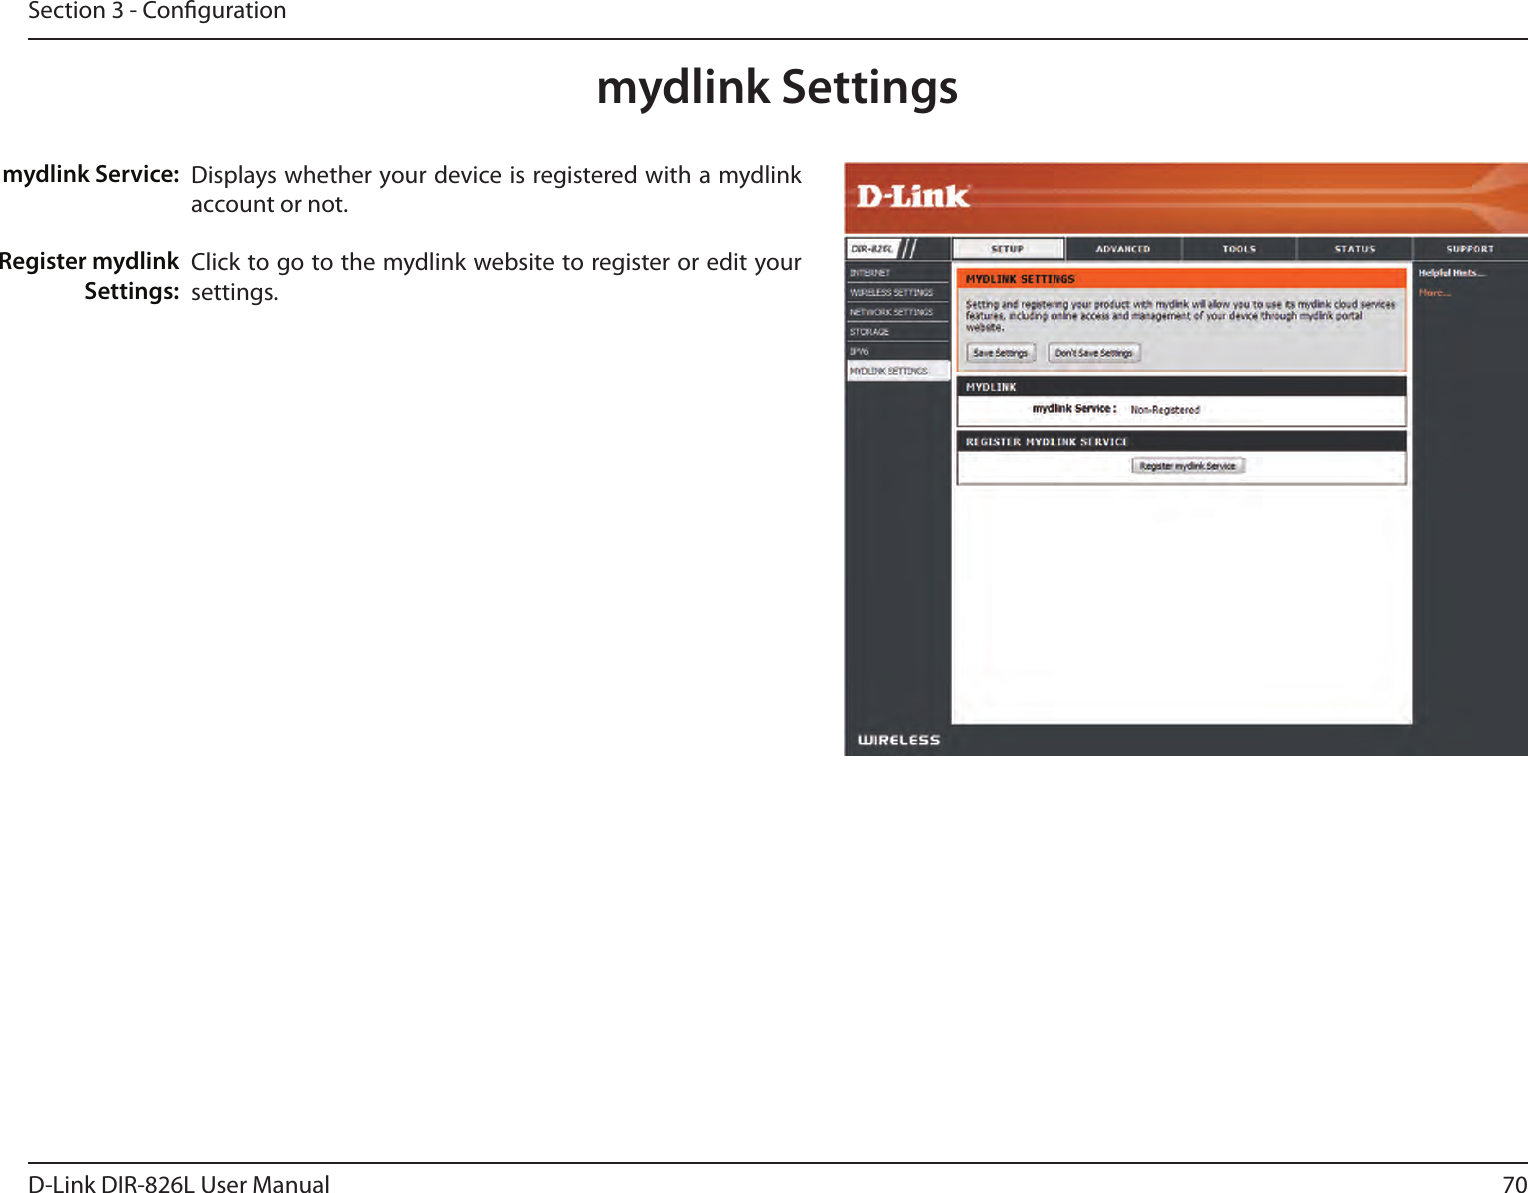 70D-Link DIR-826L User ManualSection 3 - Congurationmydlink SettingsDisplays whether your device is registered with a mydlink account or not.Click to go to the mydlink website to register or edit your settings.mydlink Service:Register mydlink Settings: